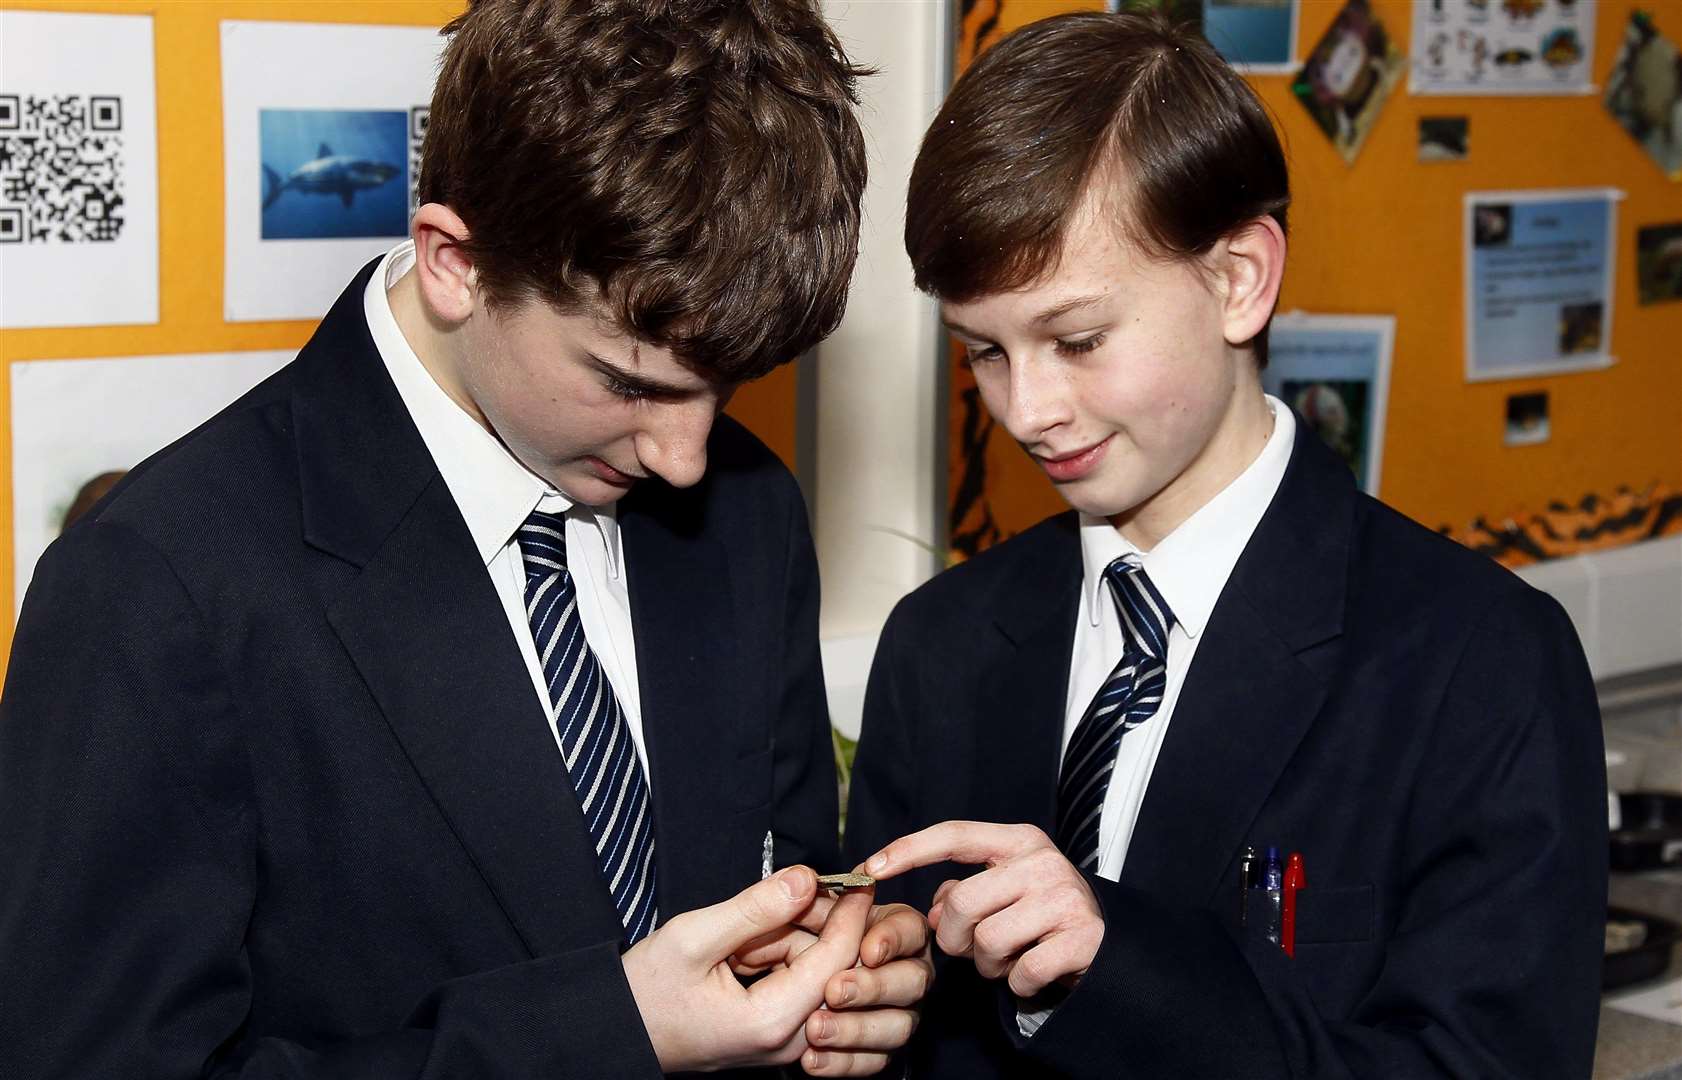 Thomas Eckley and Daniel Reilly inspect the badge. Picture: Sean Aidan (6927211)